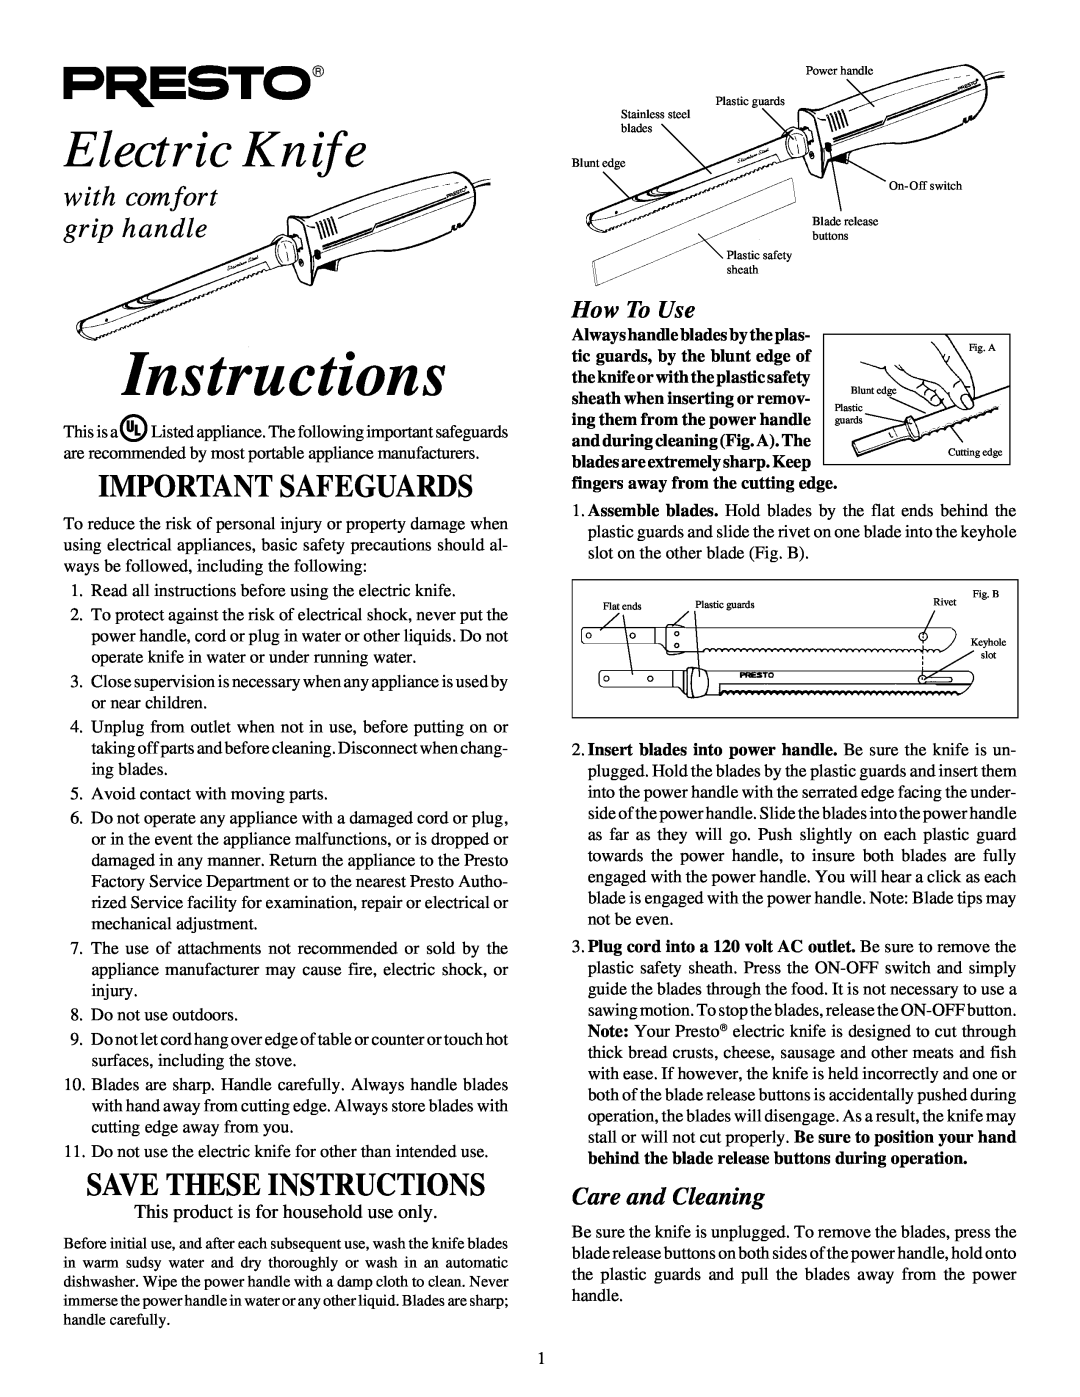 Presto Electric Knife manual How To Use, Care and Cleaning, Always handle blades by the plas, Instructions 